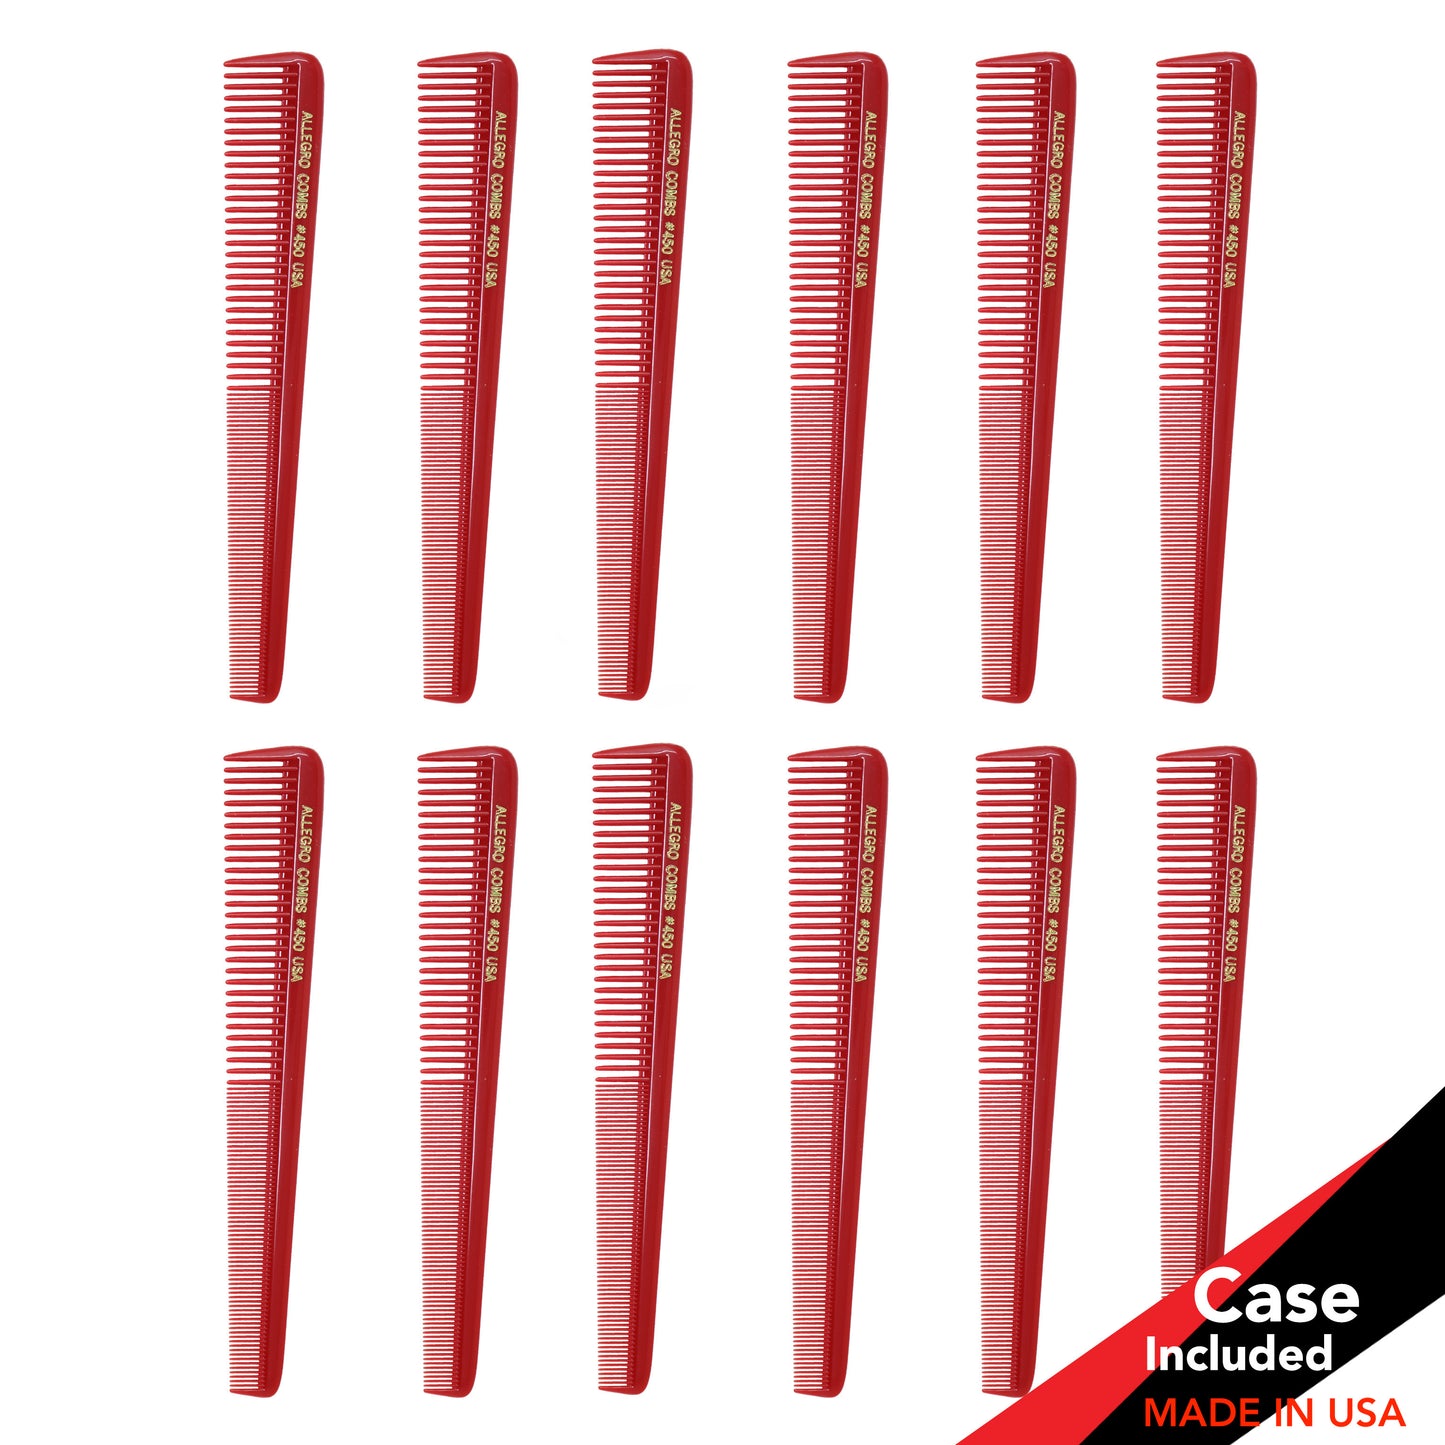 Allegro Combs 450 - Tapered Barber Hair Cutting Combs, Black, 12 Pack